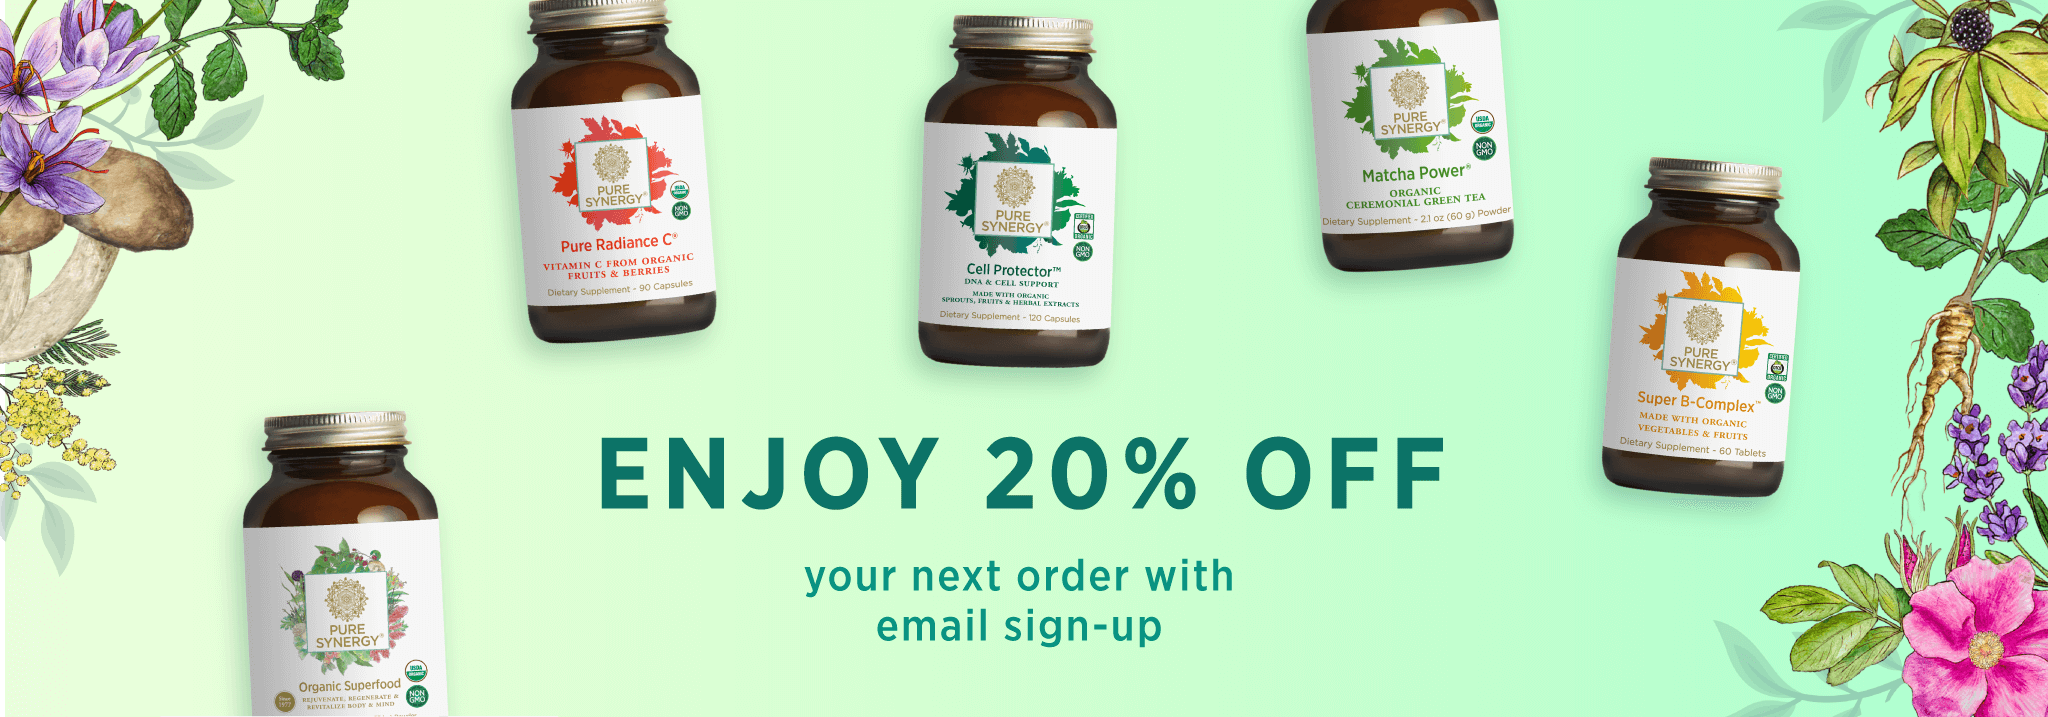 enjoy 20% off your next order with sign-up